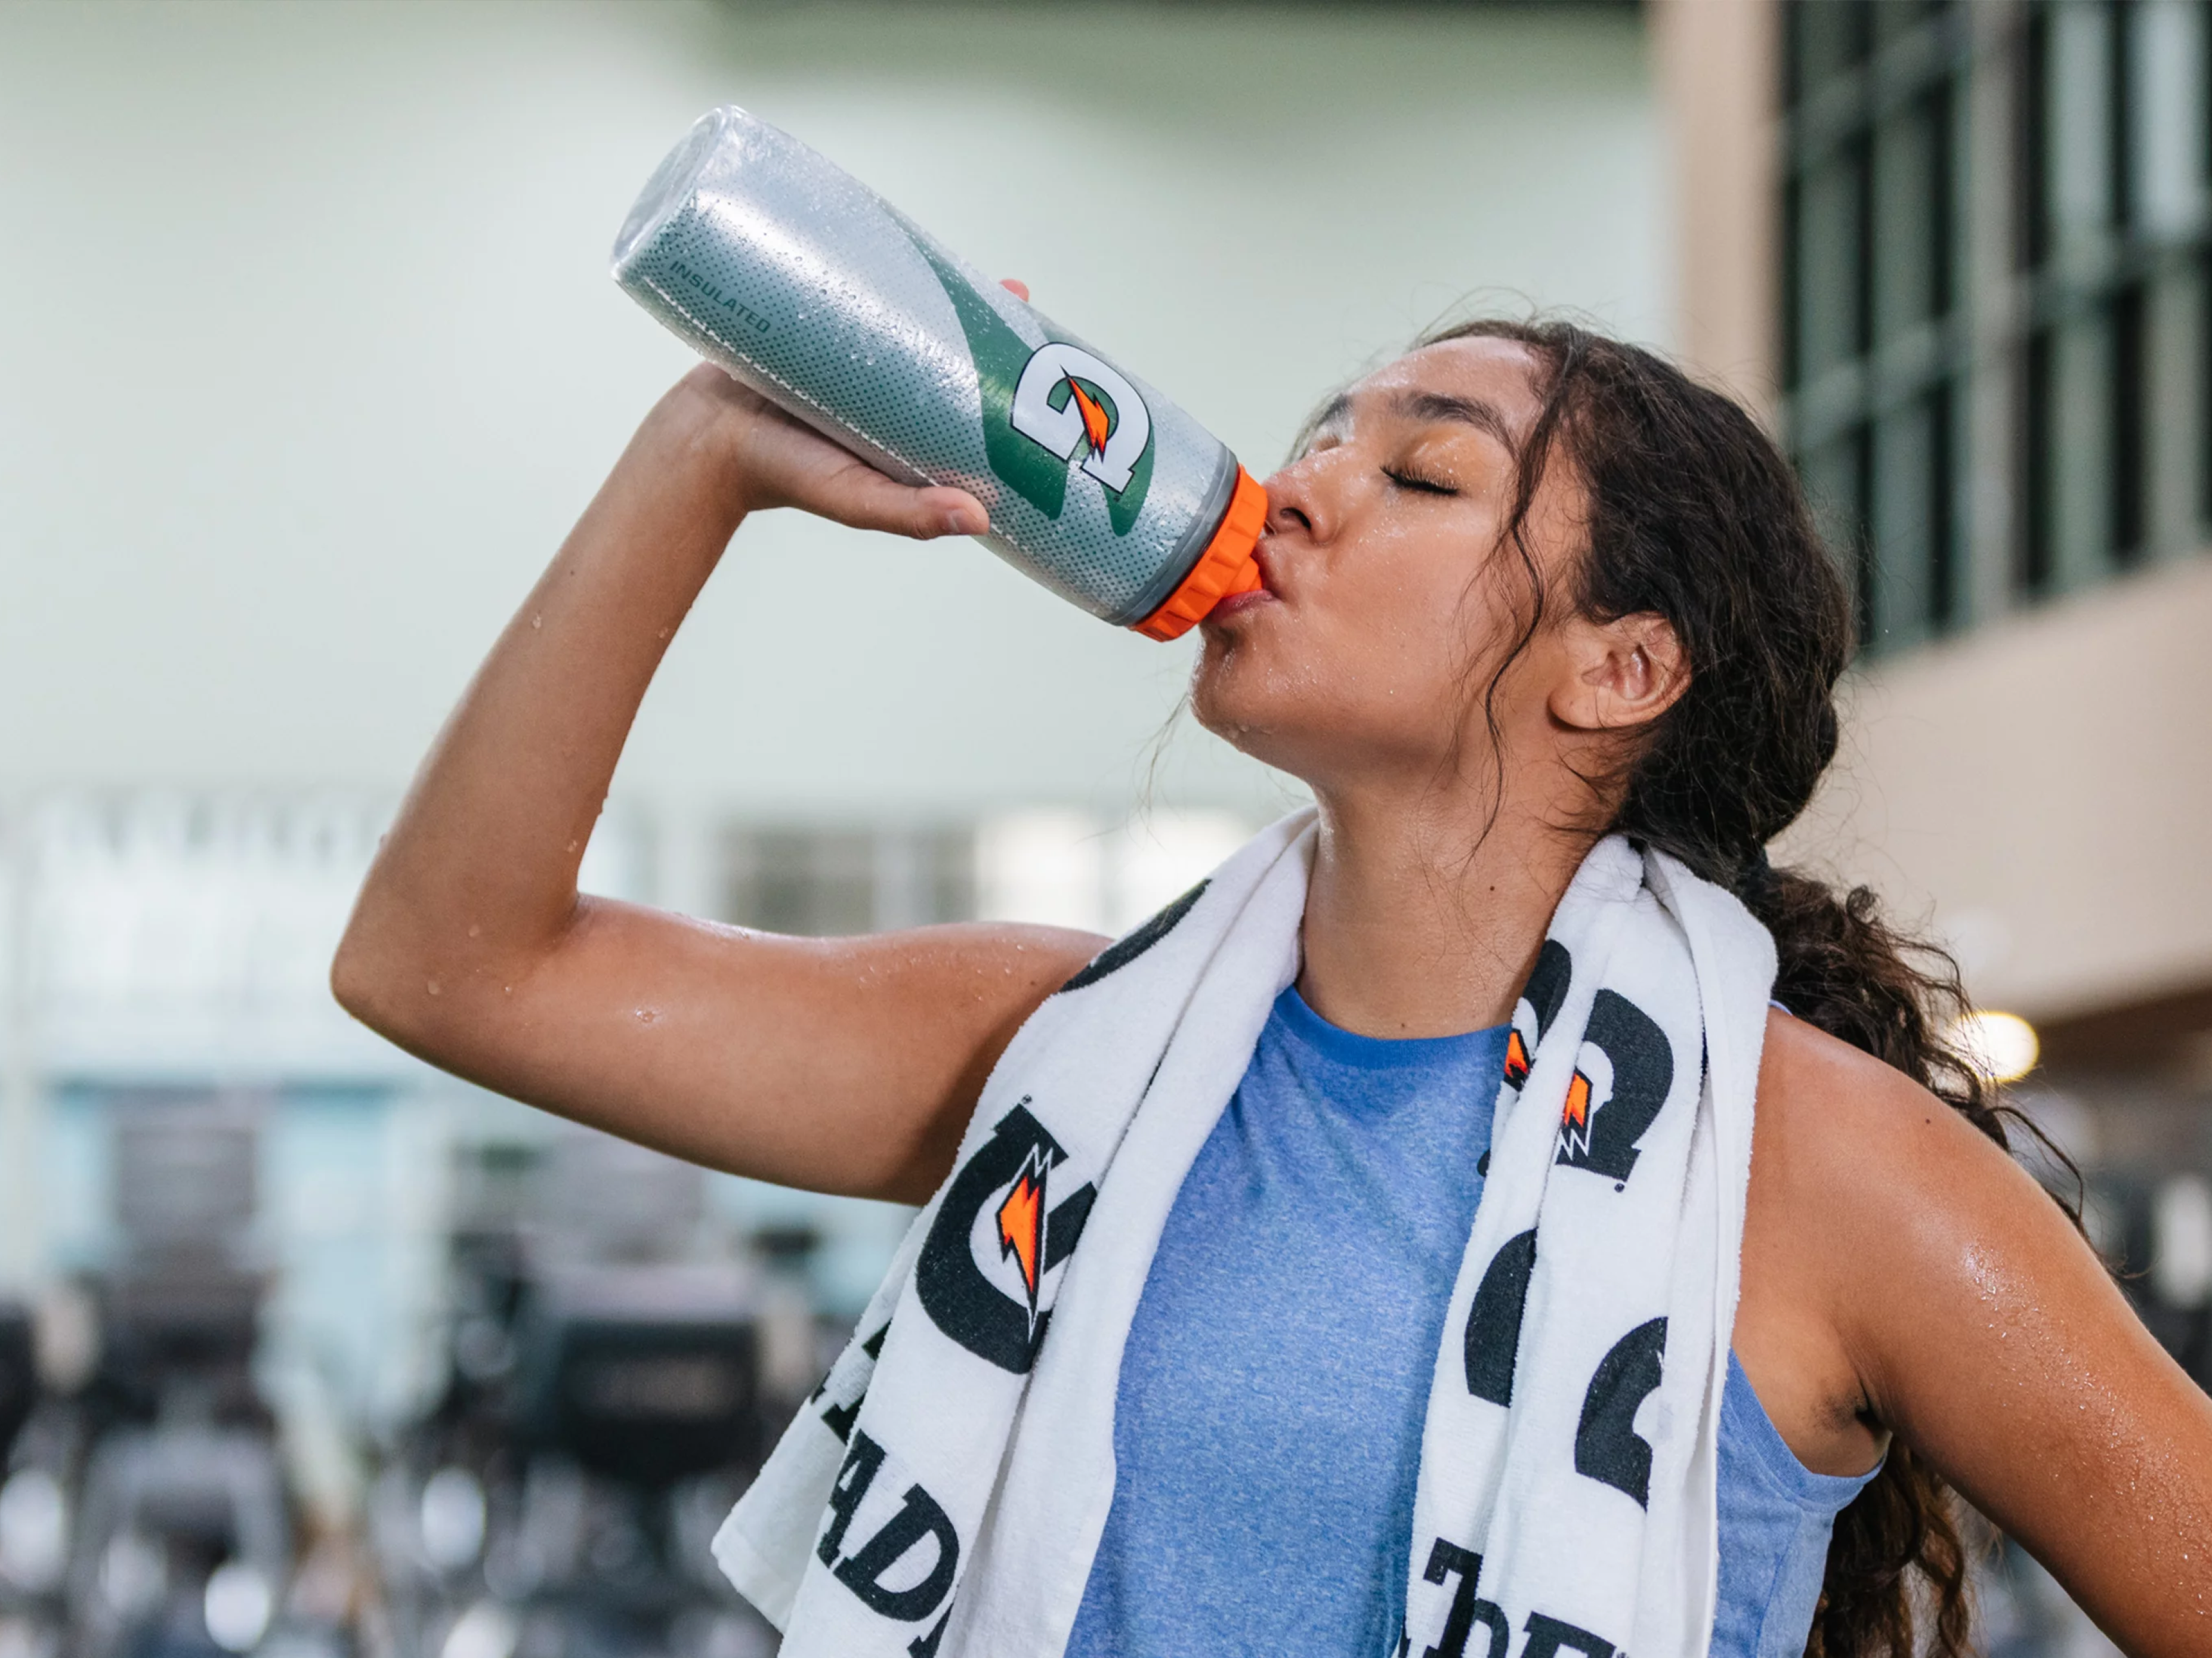 Athlete drinking from Gx bottle